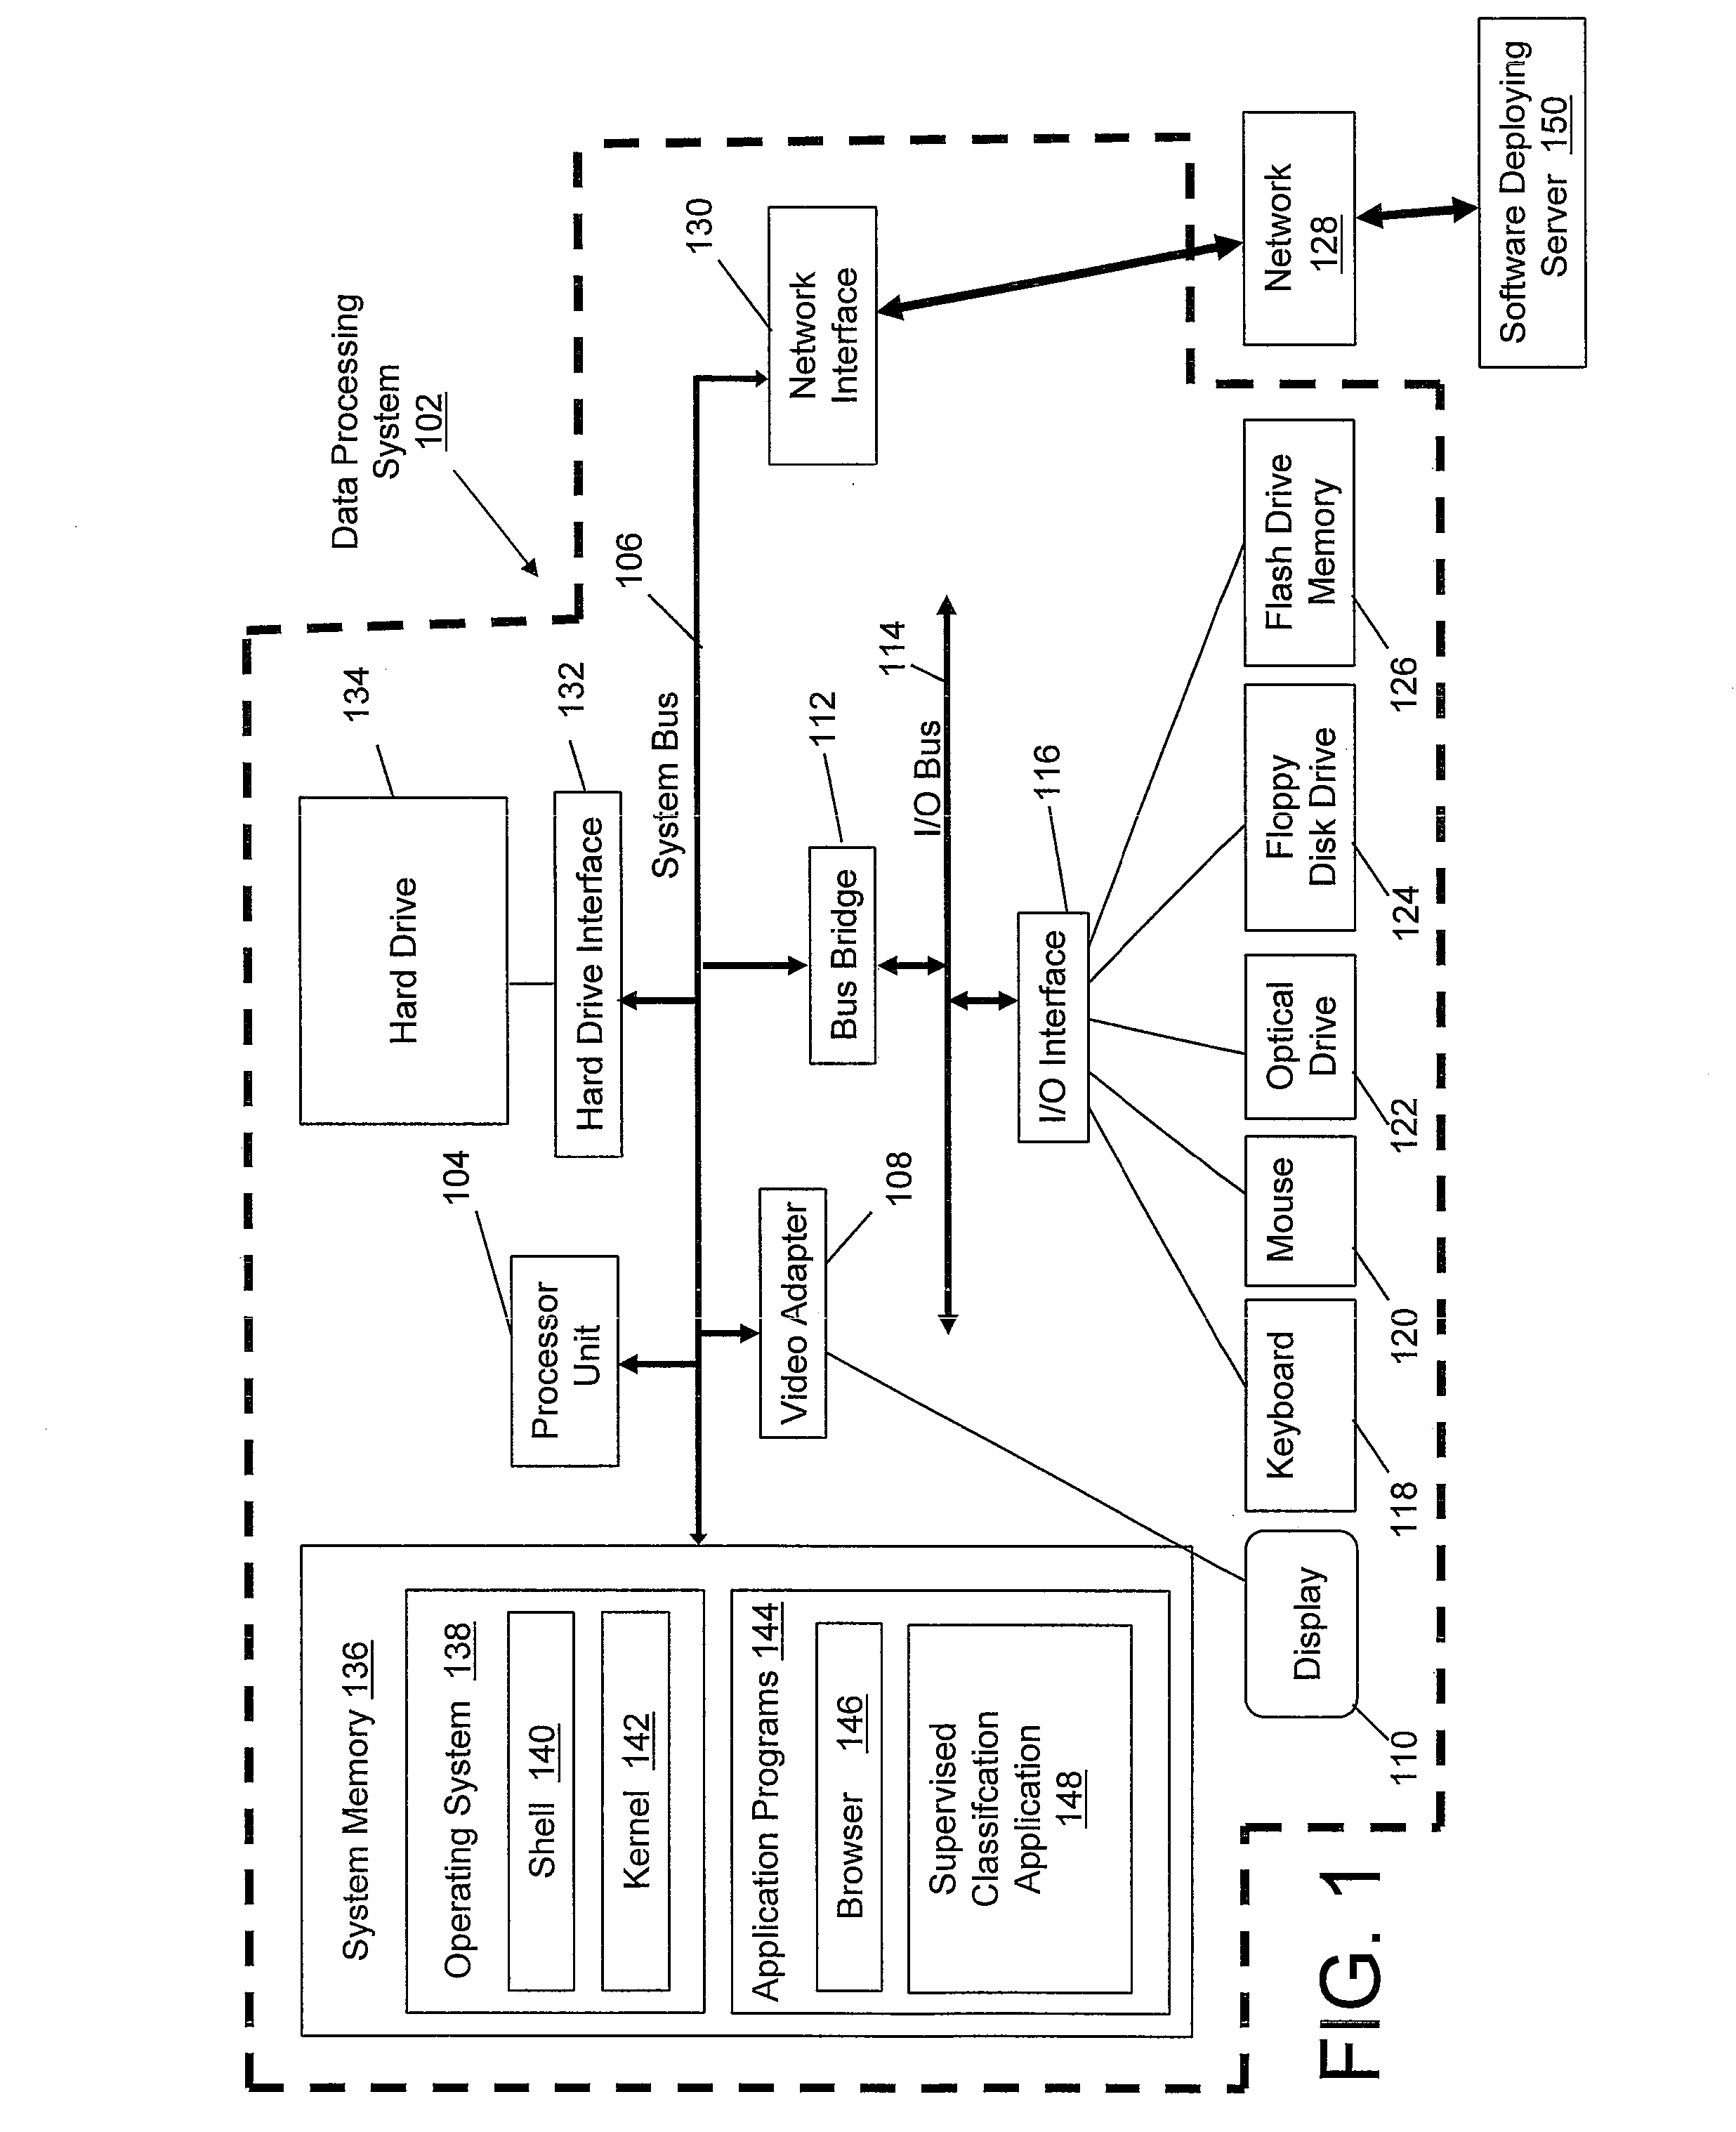 Computer-based method and system for efficient categorizing of digital documents